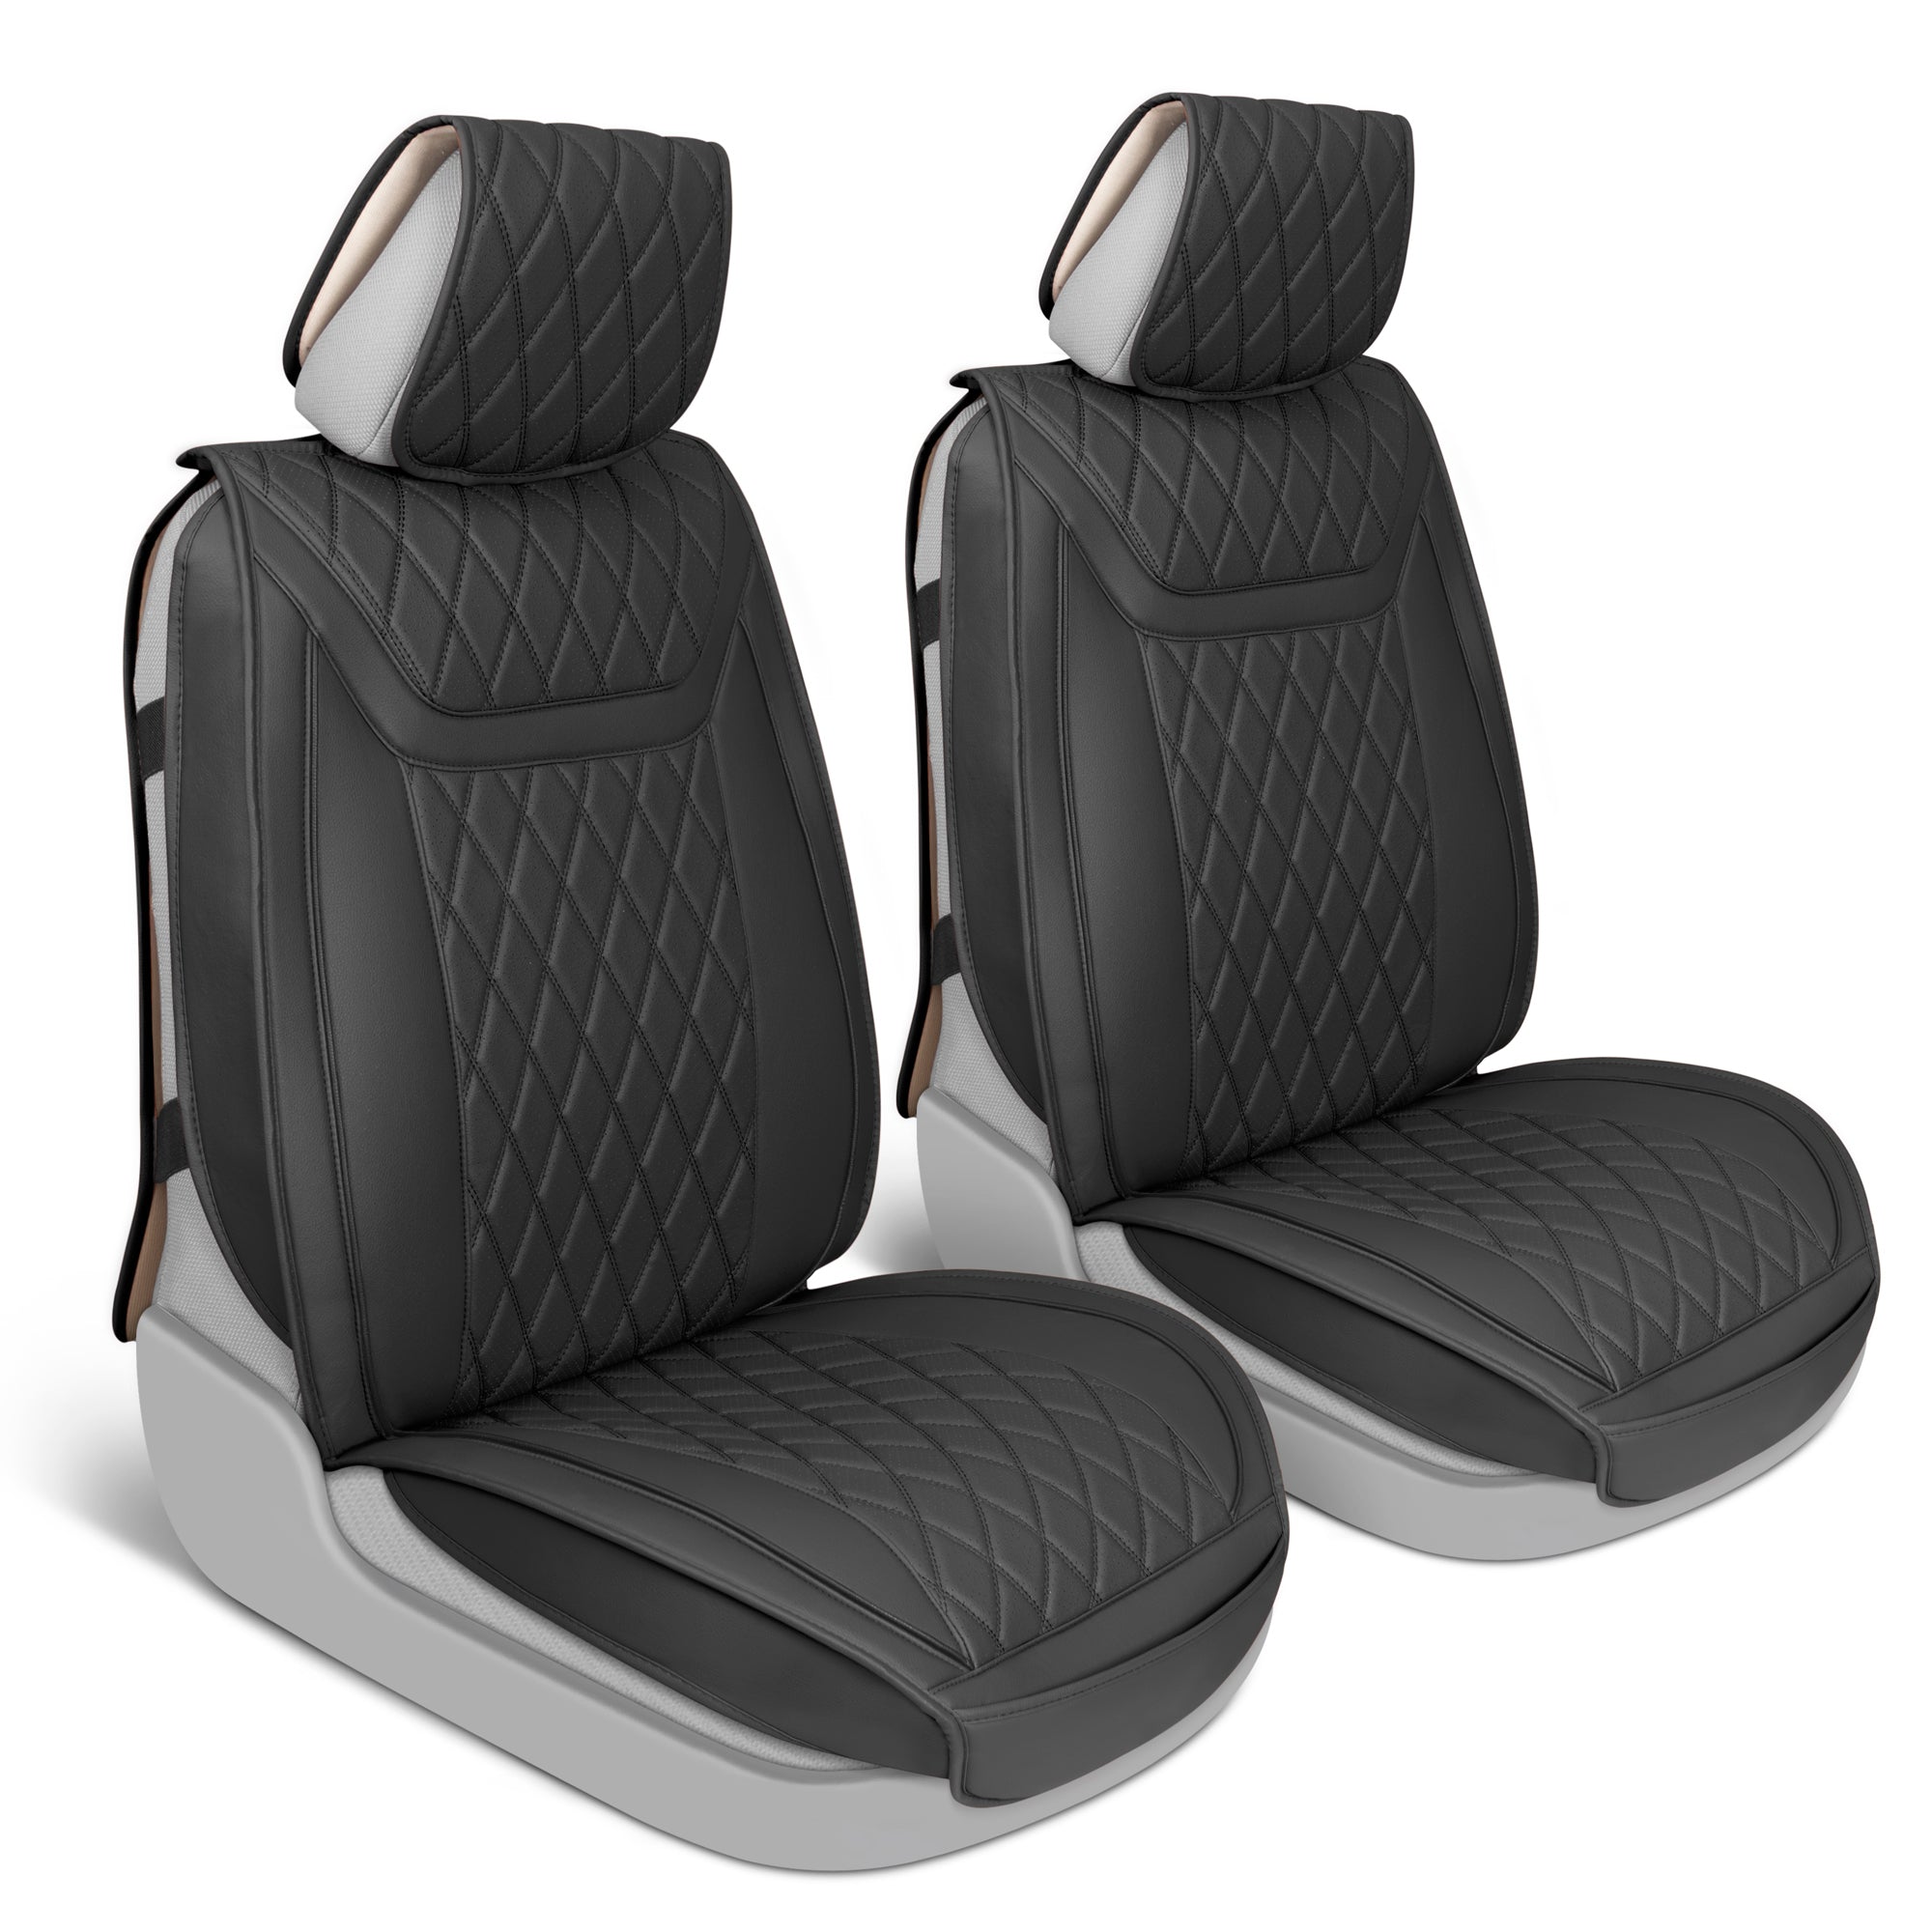 MotorBox Car Seat Covers – Ranch Leatherette Faux Leather Black Seat Covers for Car – Diamond Stitched Cushioned Seat Protectors for Automotive Accessories, Trucks, SUV, Car – Two Front Covers